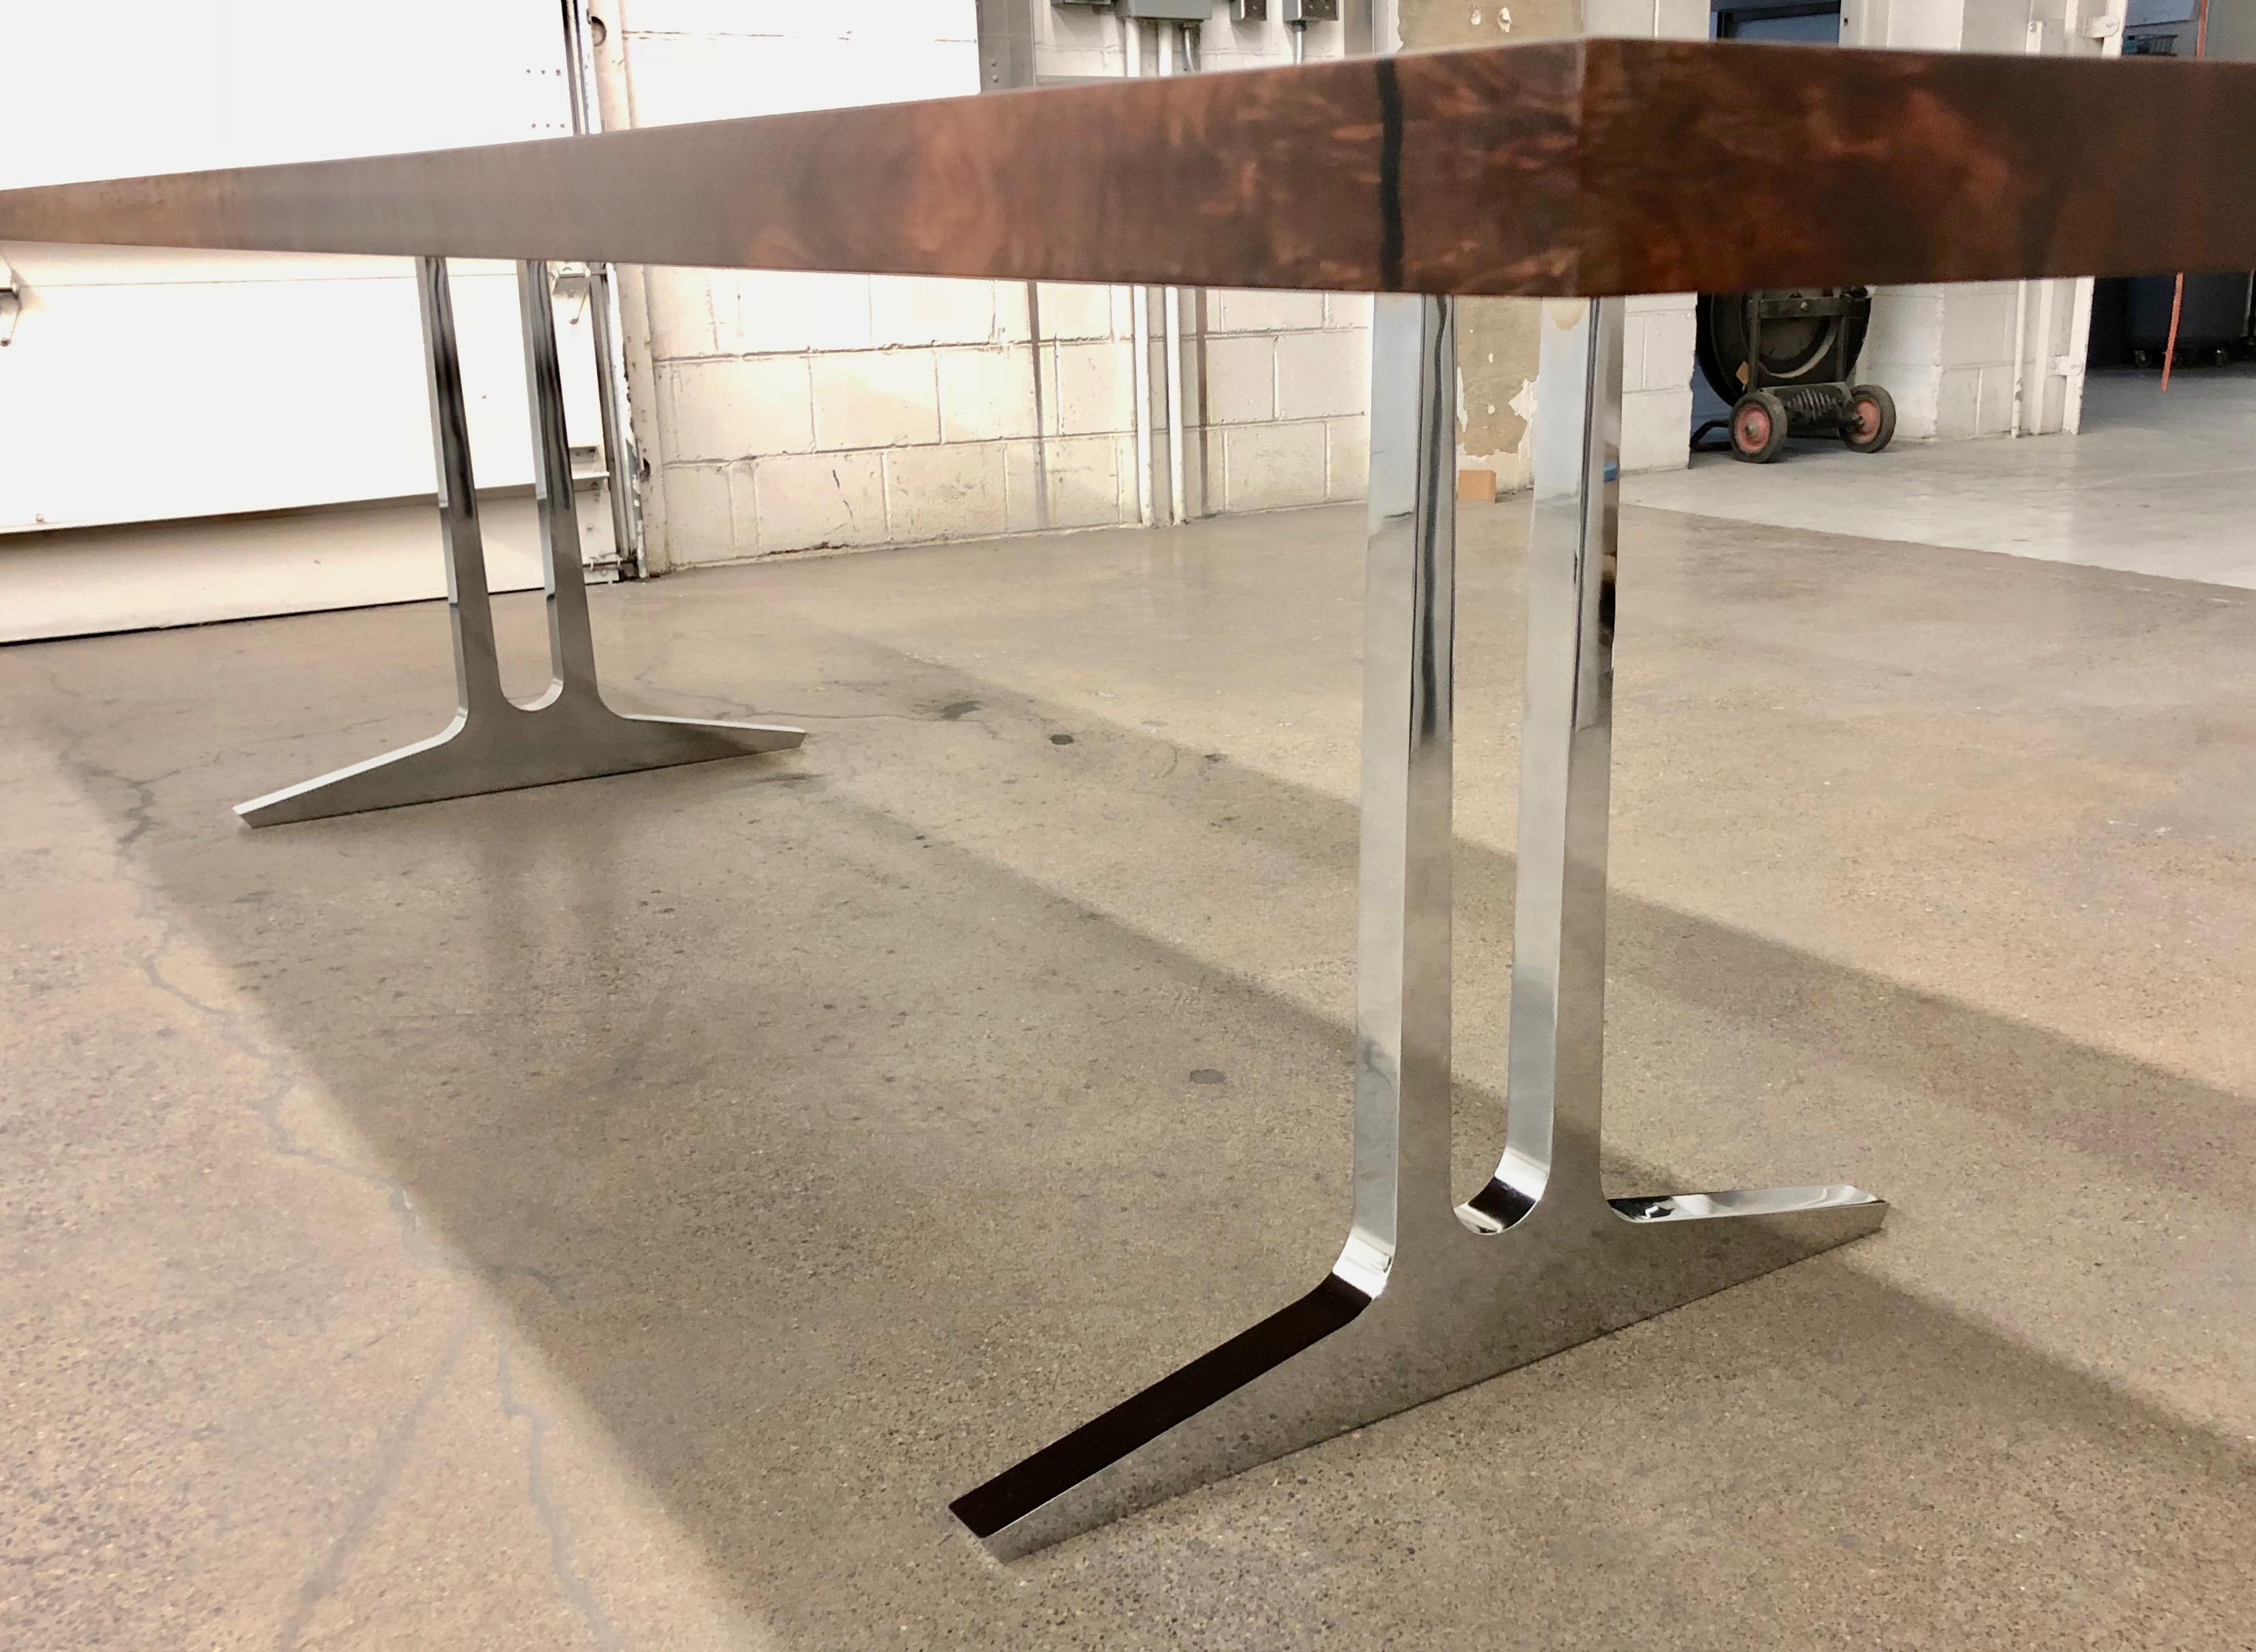 This was an absolutely spectacular walnut slab with amazing figuring throughout the whole piece. We were really happy that this client chose to go wit the straight edge. With all of the action going on in the slab, our feeling was having raw edges